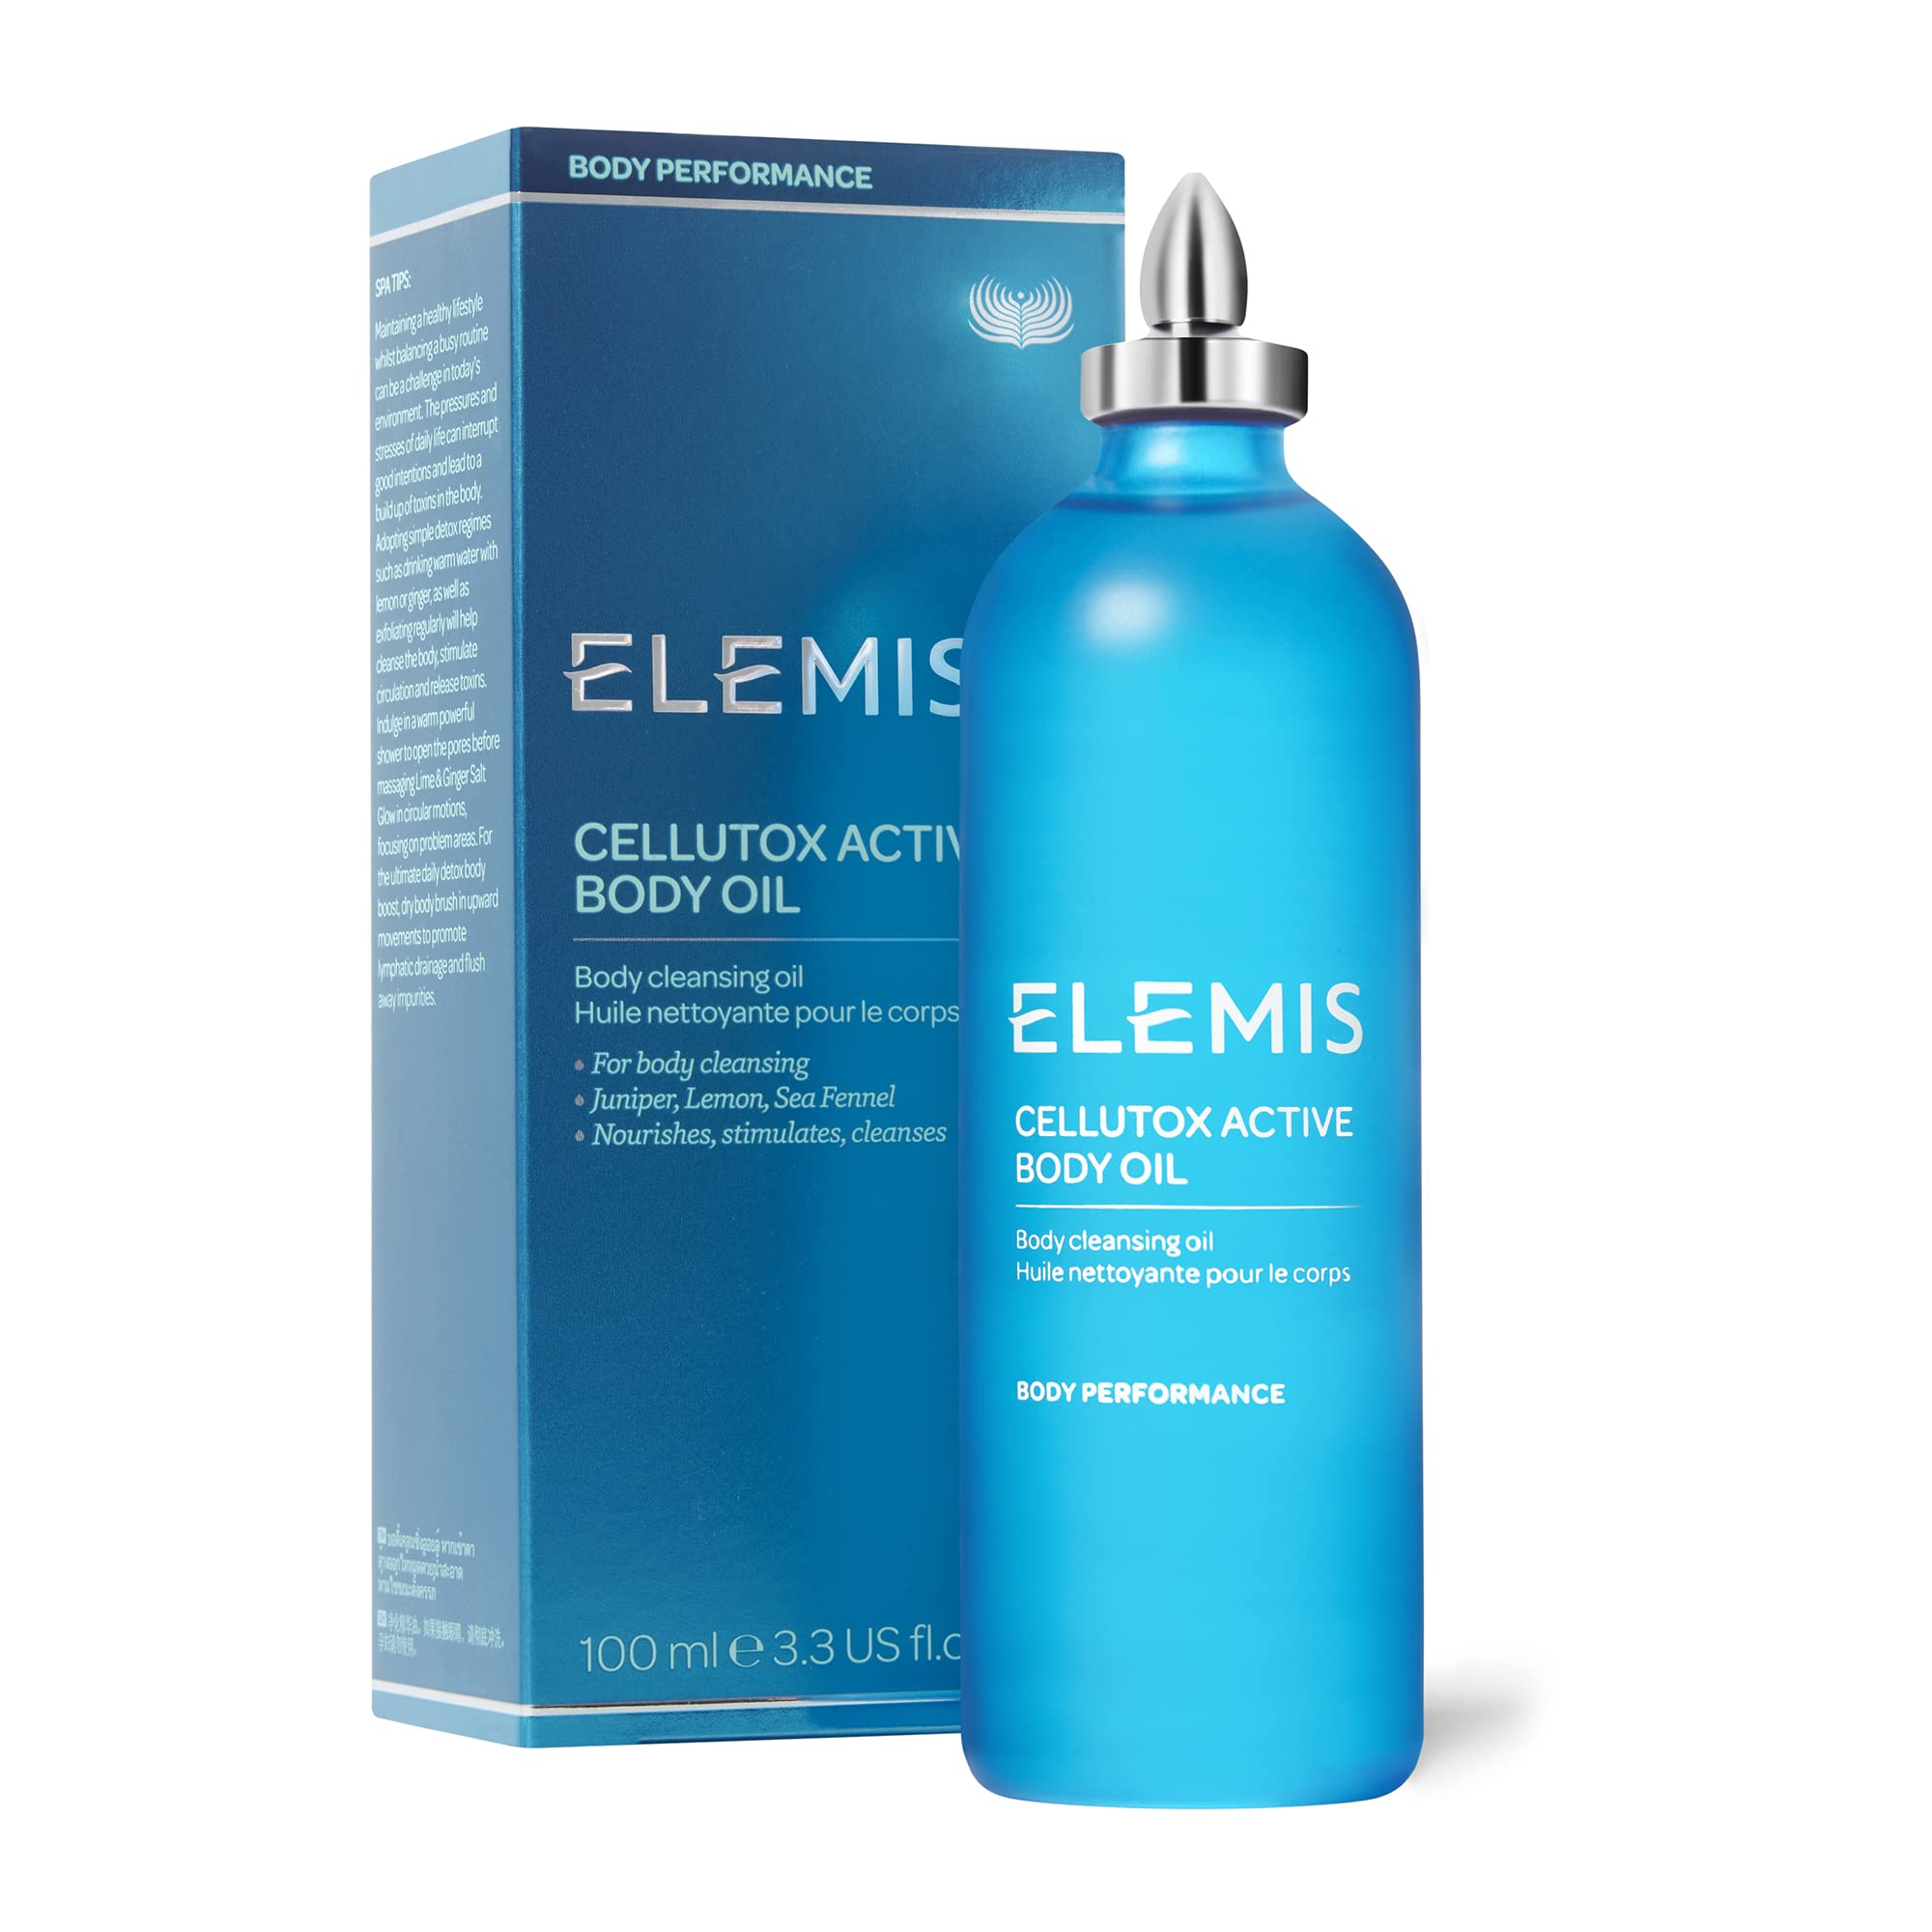 ELEMIS Cellutox Active Body Oil | Lightweight, Scented Anti-Cellulite Oil Deeply Nourishes, Detoxifies, and Stimulates the Body and Mind | 100 mL , 3.3 Fl Oz (Pack of 1)